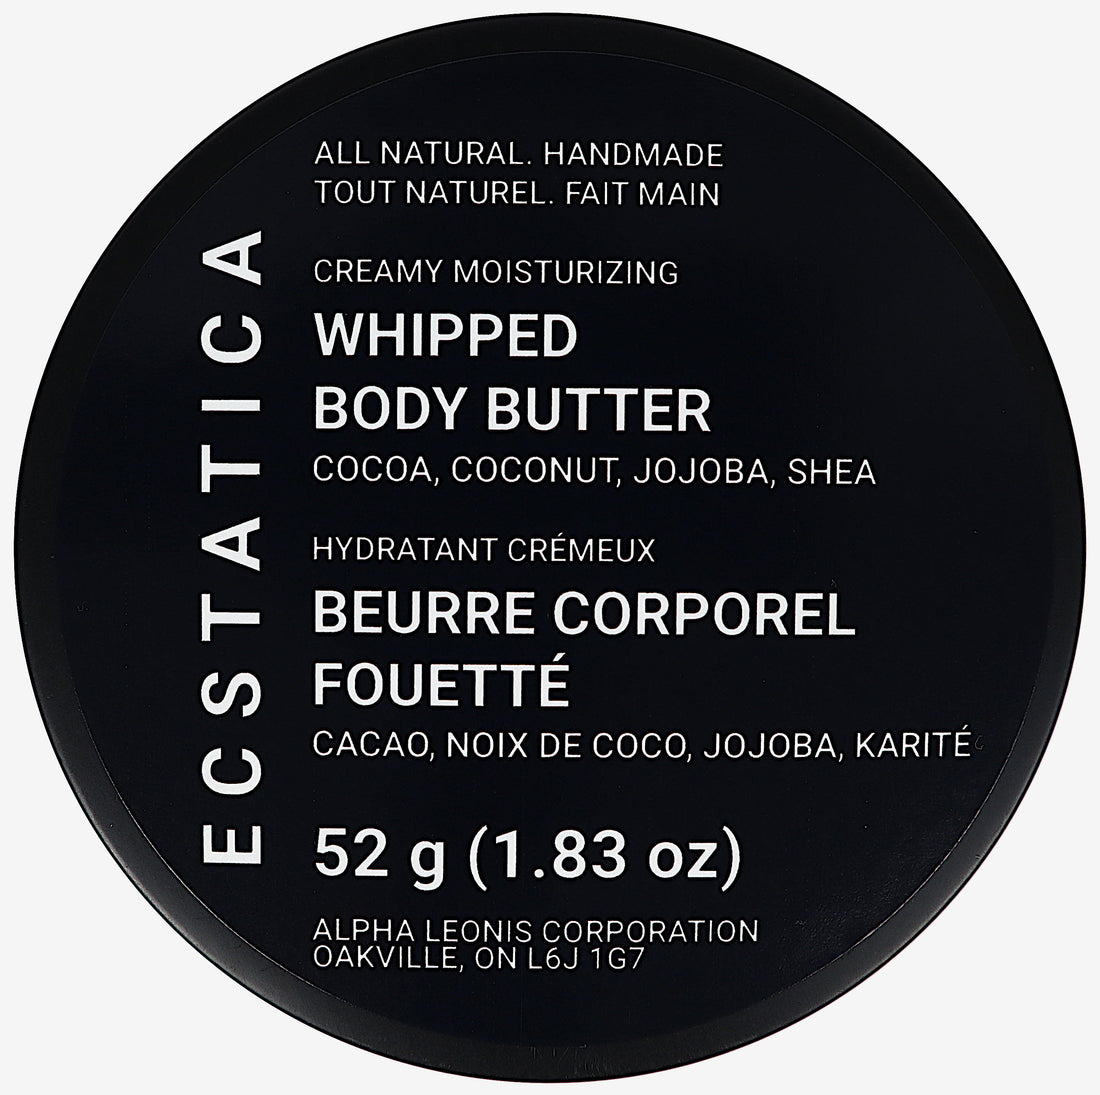 Ecstatica Canadian All-Natural Handmade Local Creamy Maximum Delicacy Whipped Body Butter Cocoa Butter, Coconut Oil, Jojoba Oil, Shea Butter 52 g (1.83 oz) Top Lid